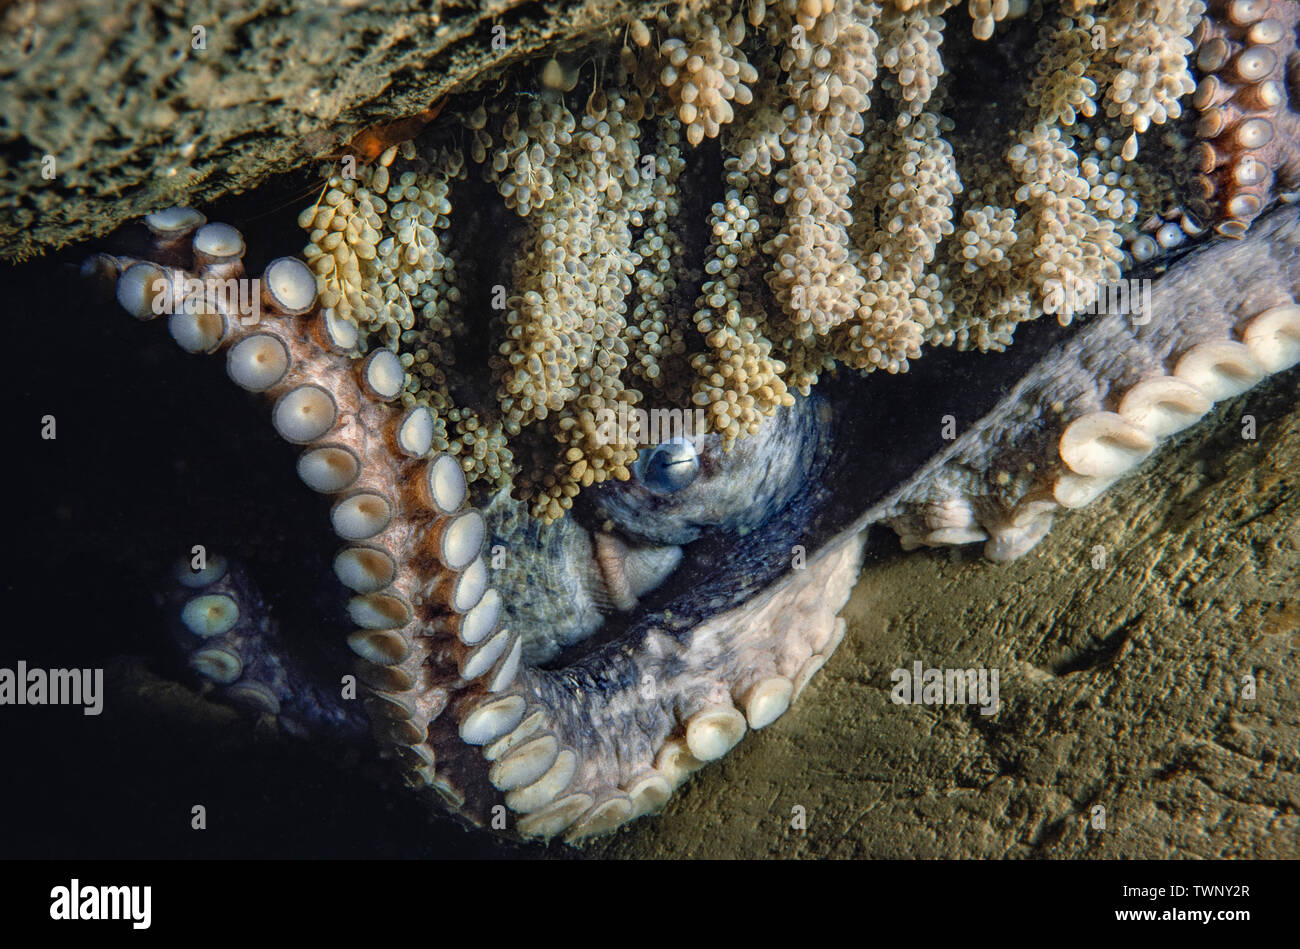 This female giant Pacific octopus, Enteroctopus dolfleini, or North Pacific giant octopus, is nearing the end of her life. The eggs she has been tendi Stock Photo